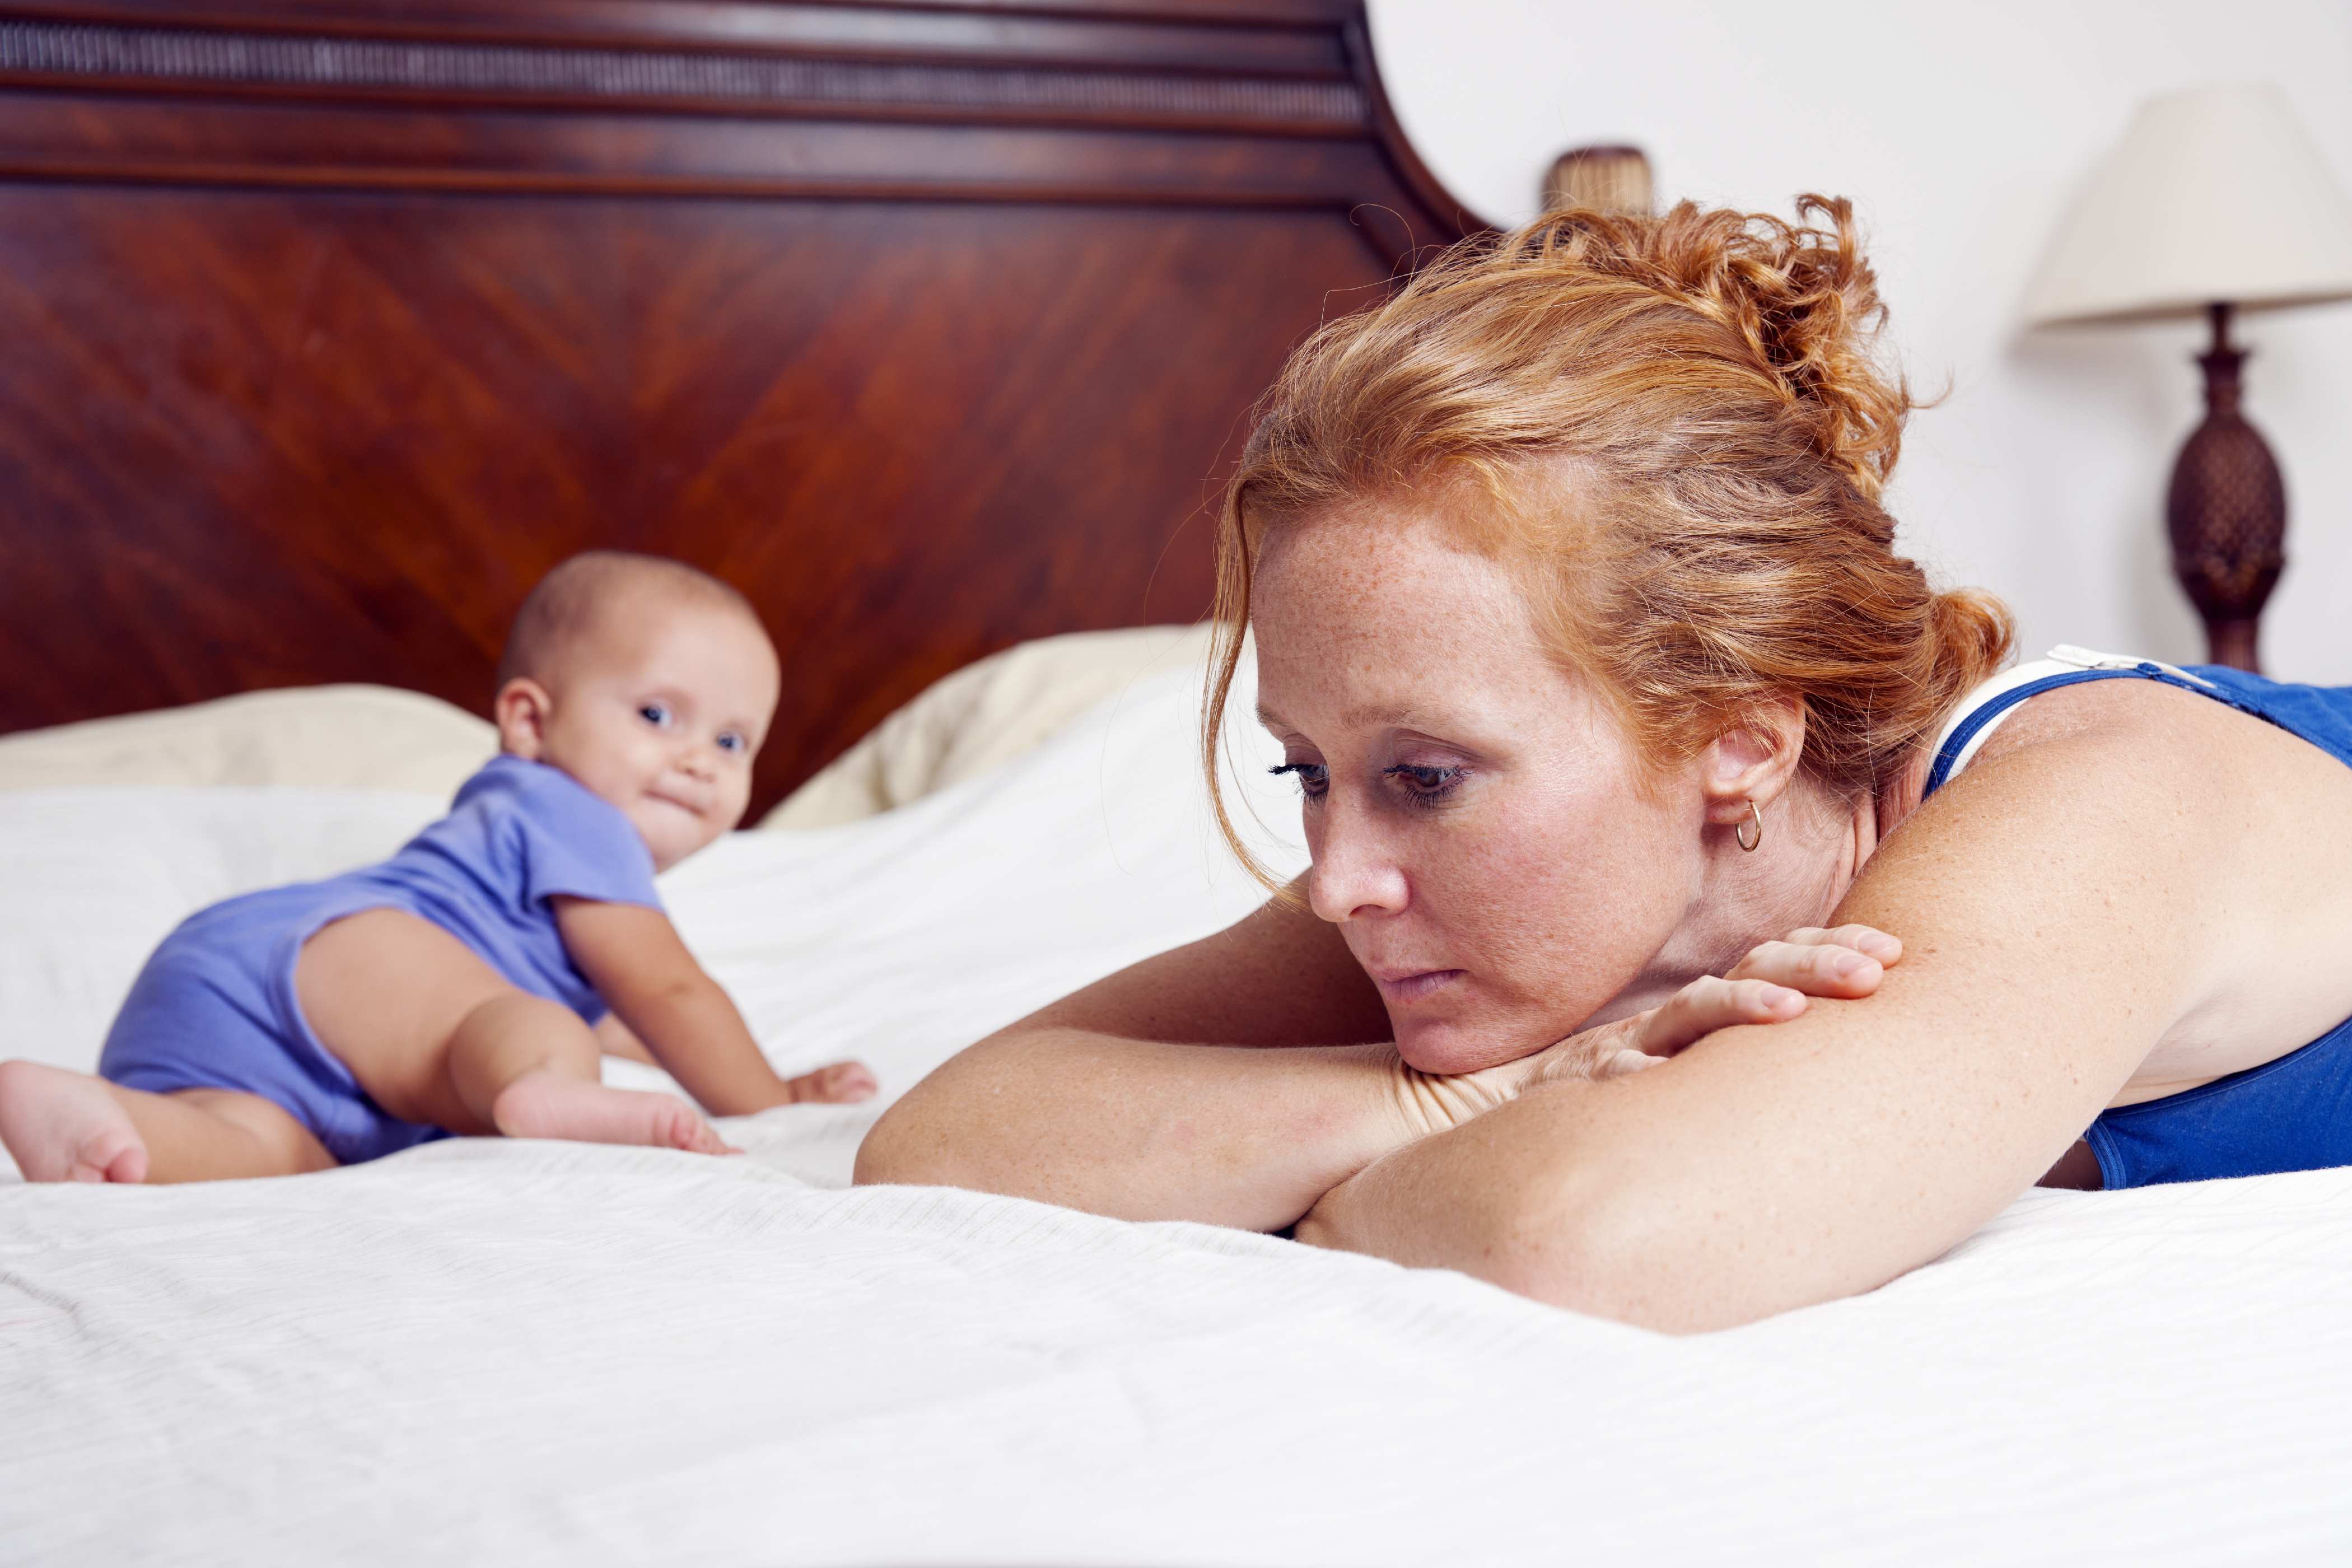 New mother struggling with depression. (iStock Photo)